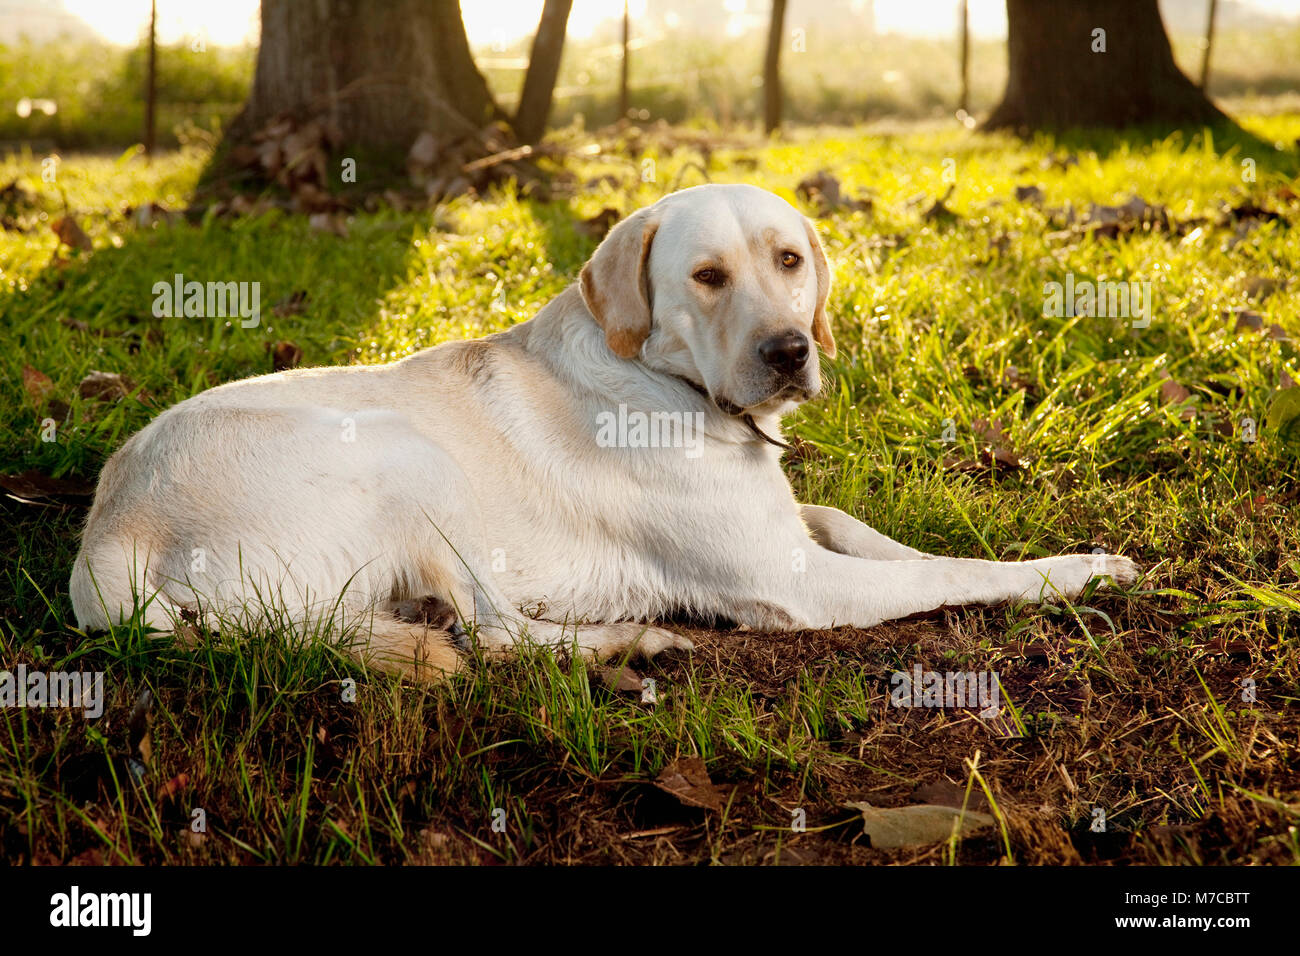 Dog sitting in a field at dawn Stock Photo